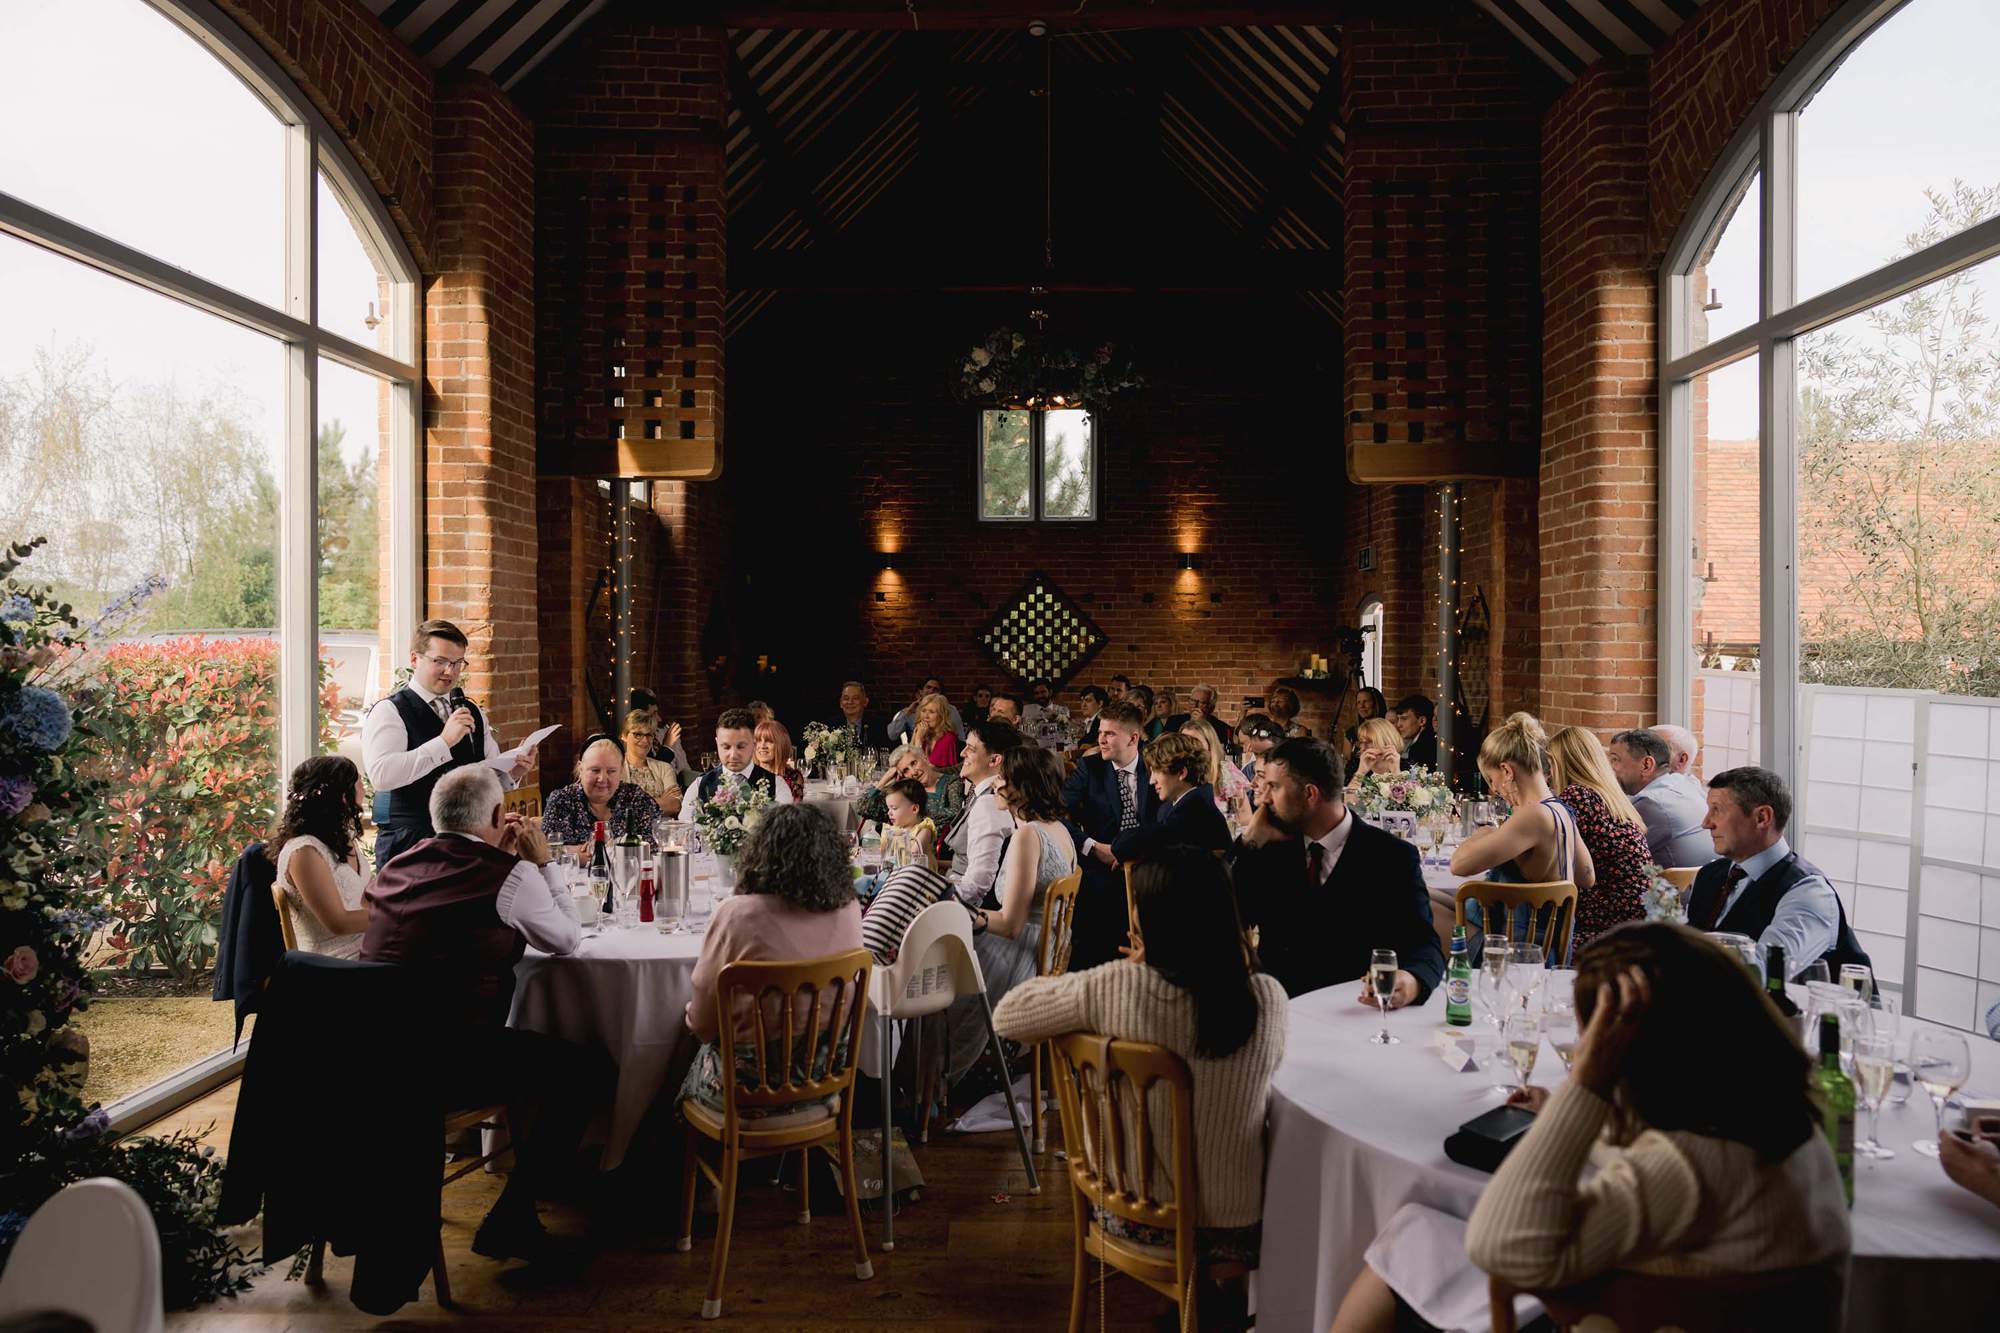 Groom delivers his speech at a wedding at Swallows Nest Barn in Warwickshire.